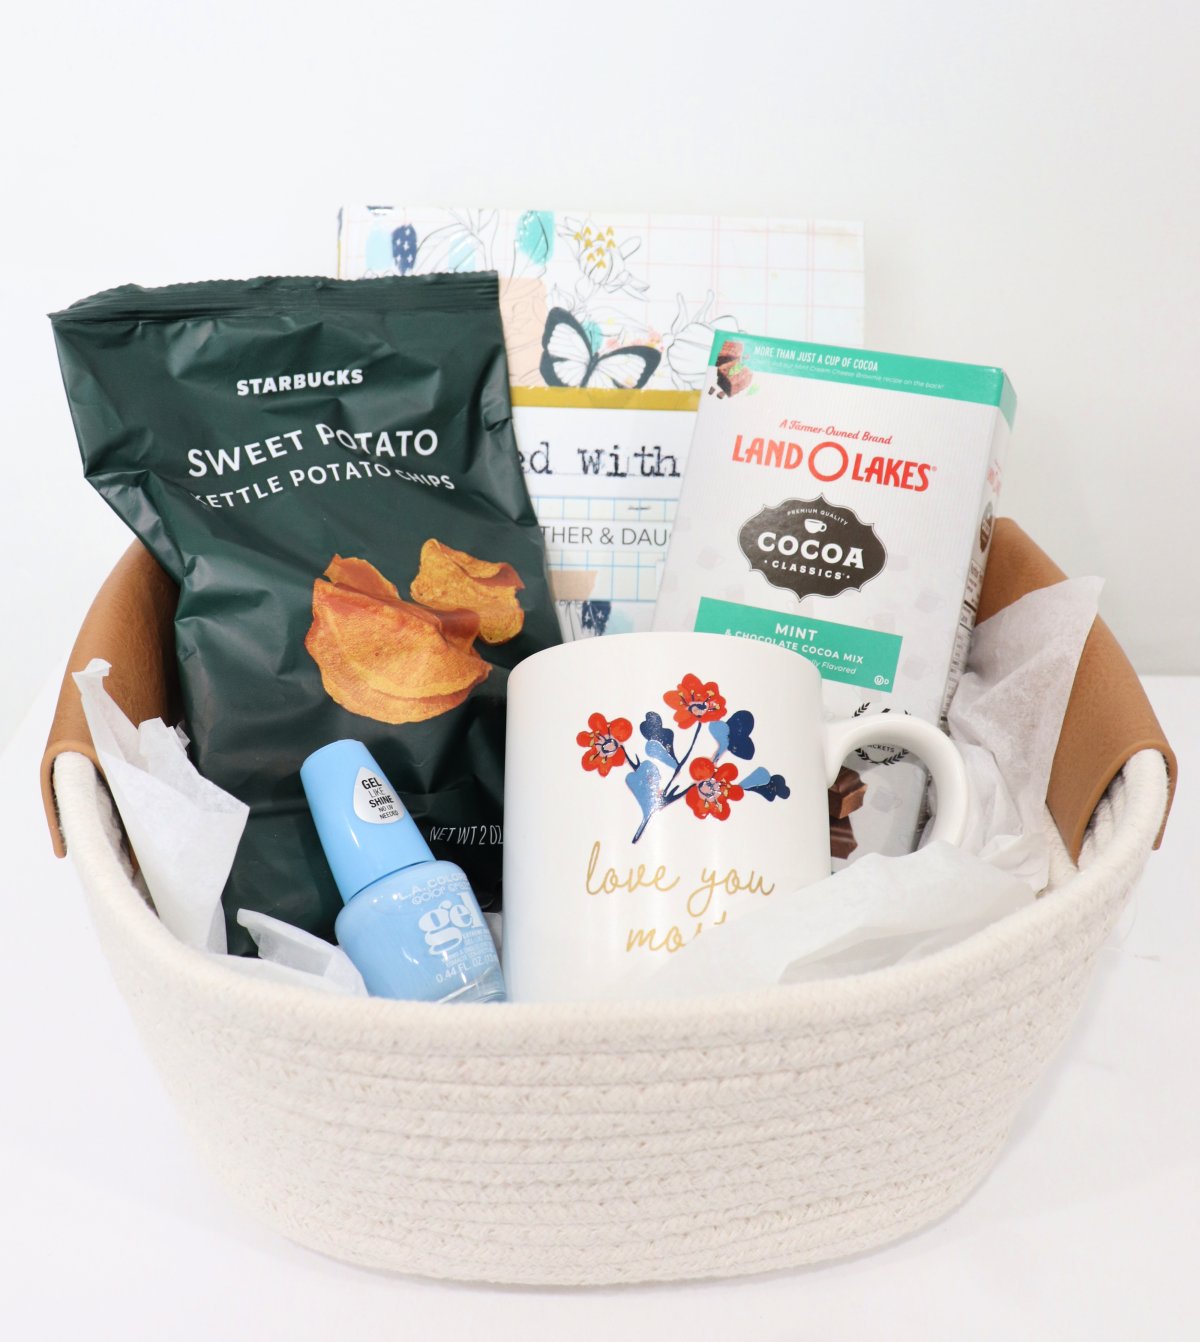 Image contains a cream colored basket holding a bag of sweet potato chips, a mother-daughter journal, a package of mint cocoa, a bottle of blue nail polish, and a coffee mug, on a white background.